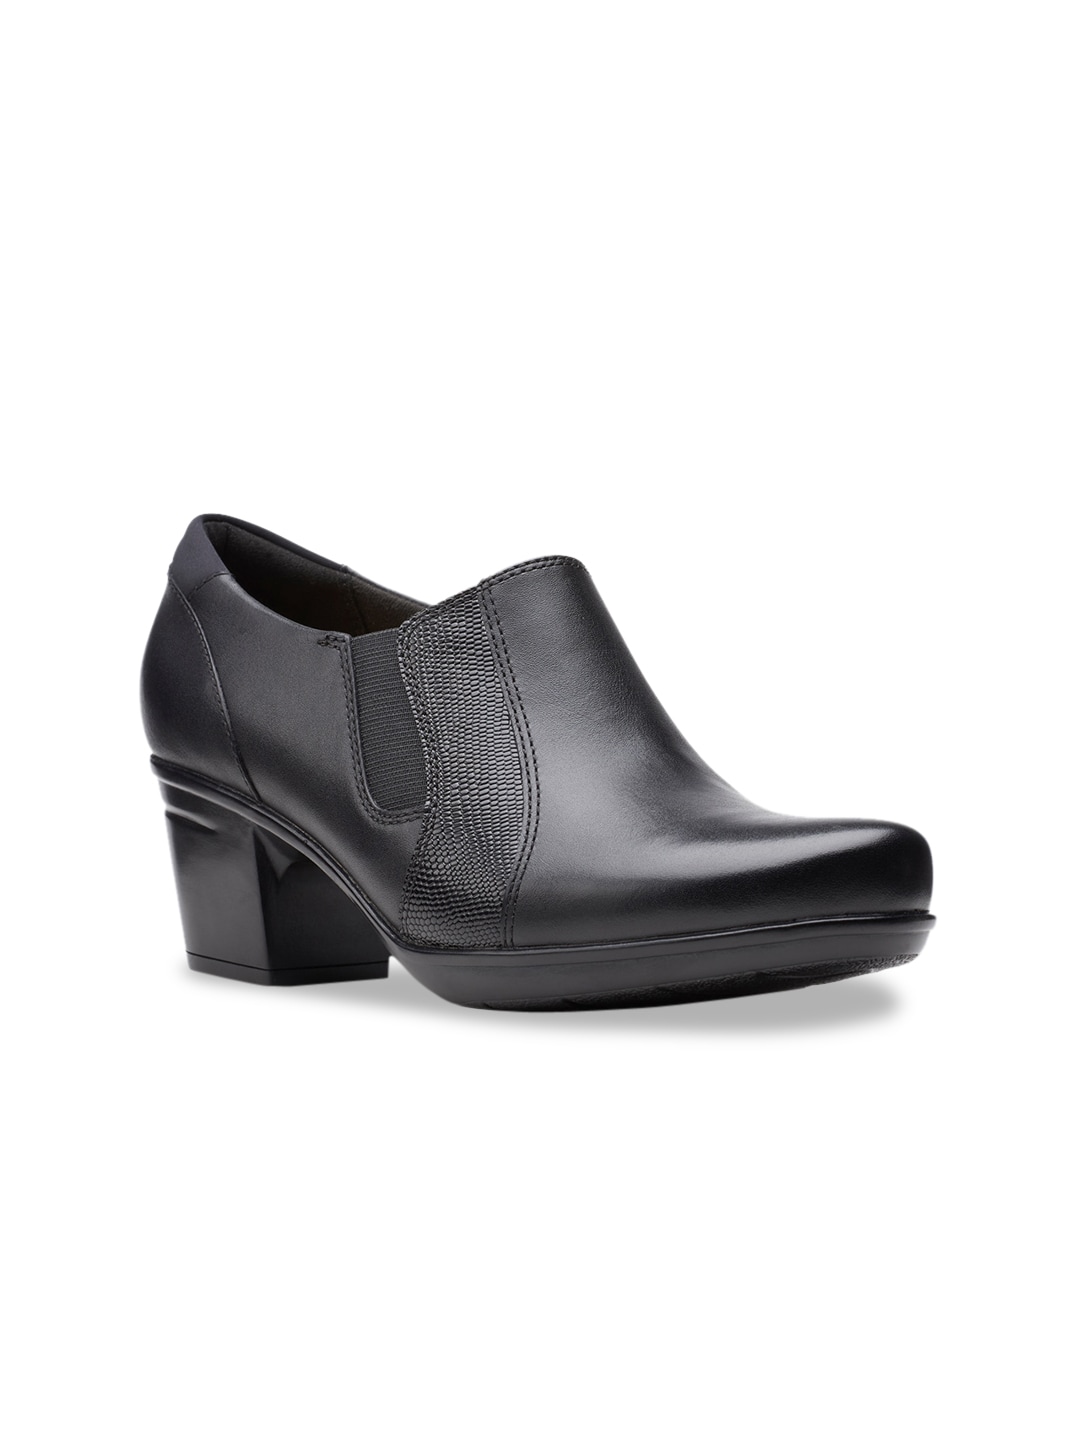 Clarks Black Textured Leather Work Block Heeled Boots Price in India